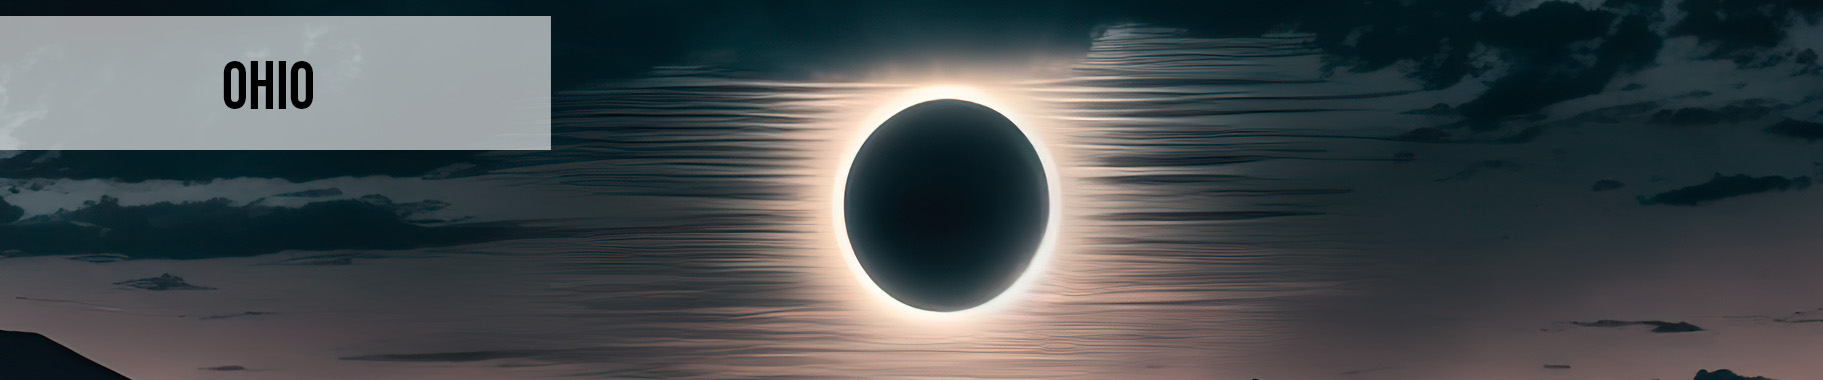 Totality Phases in Ohio State - US